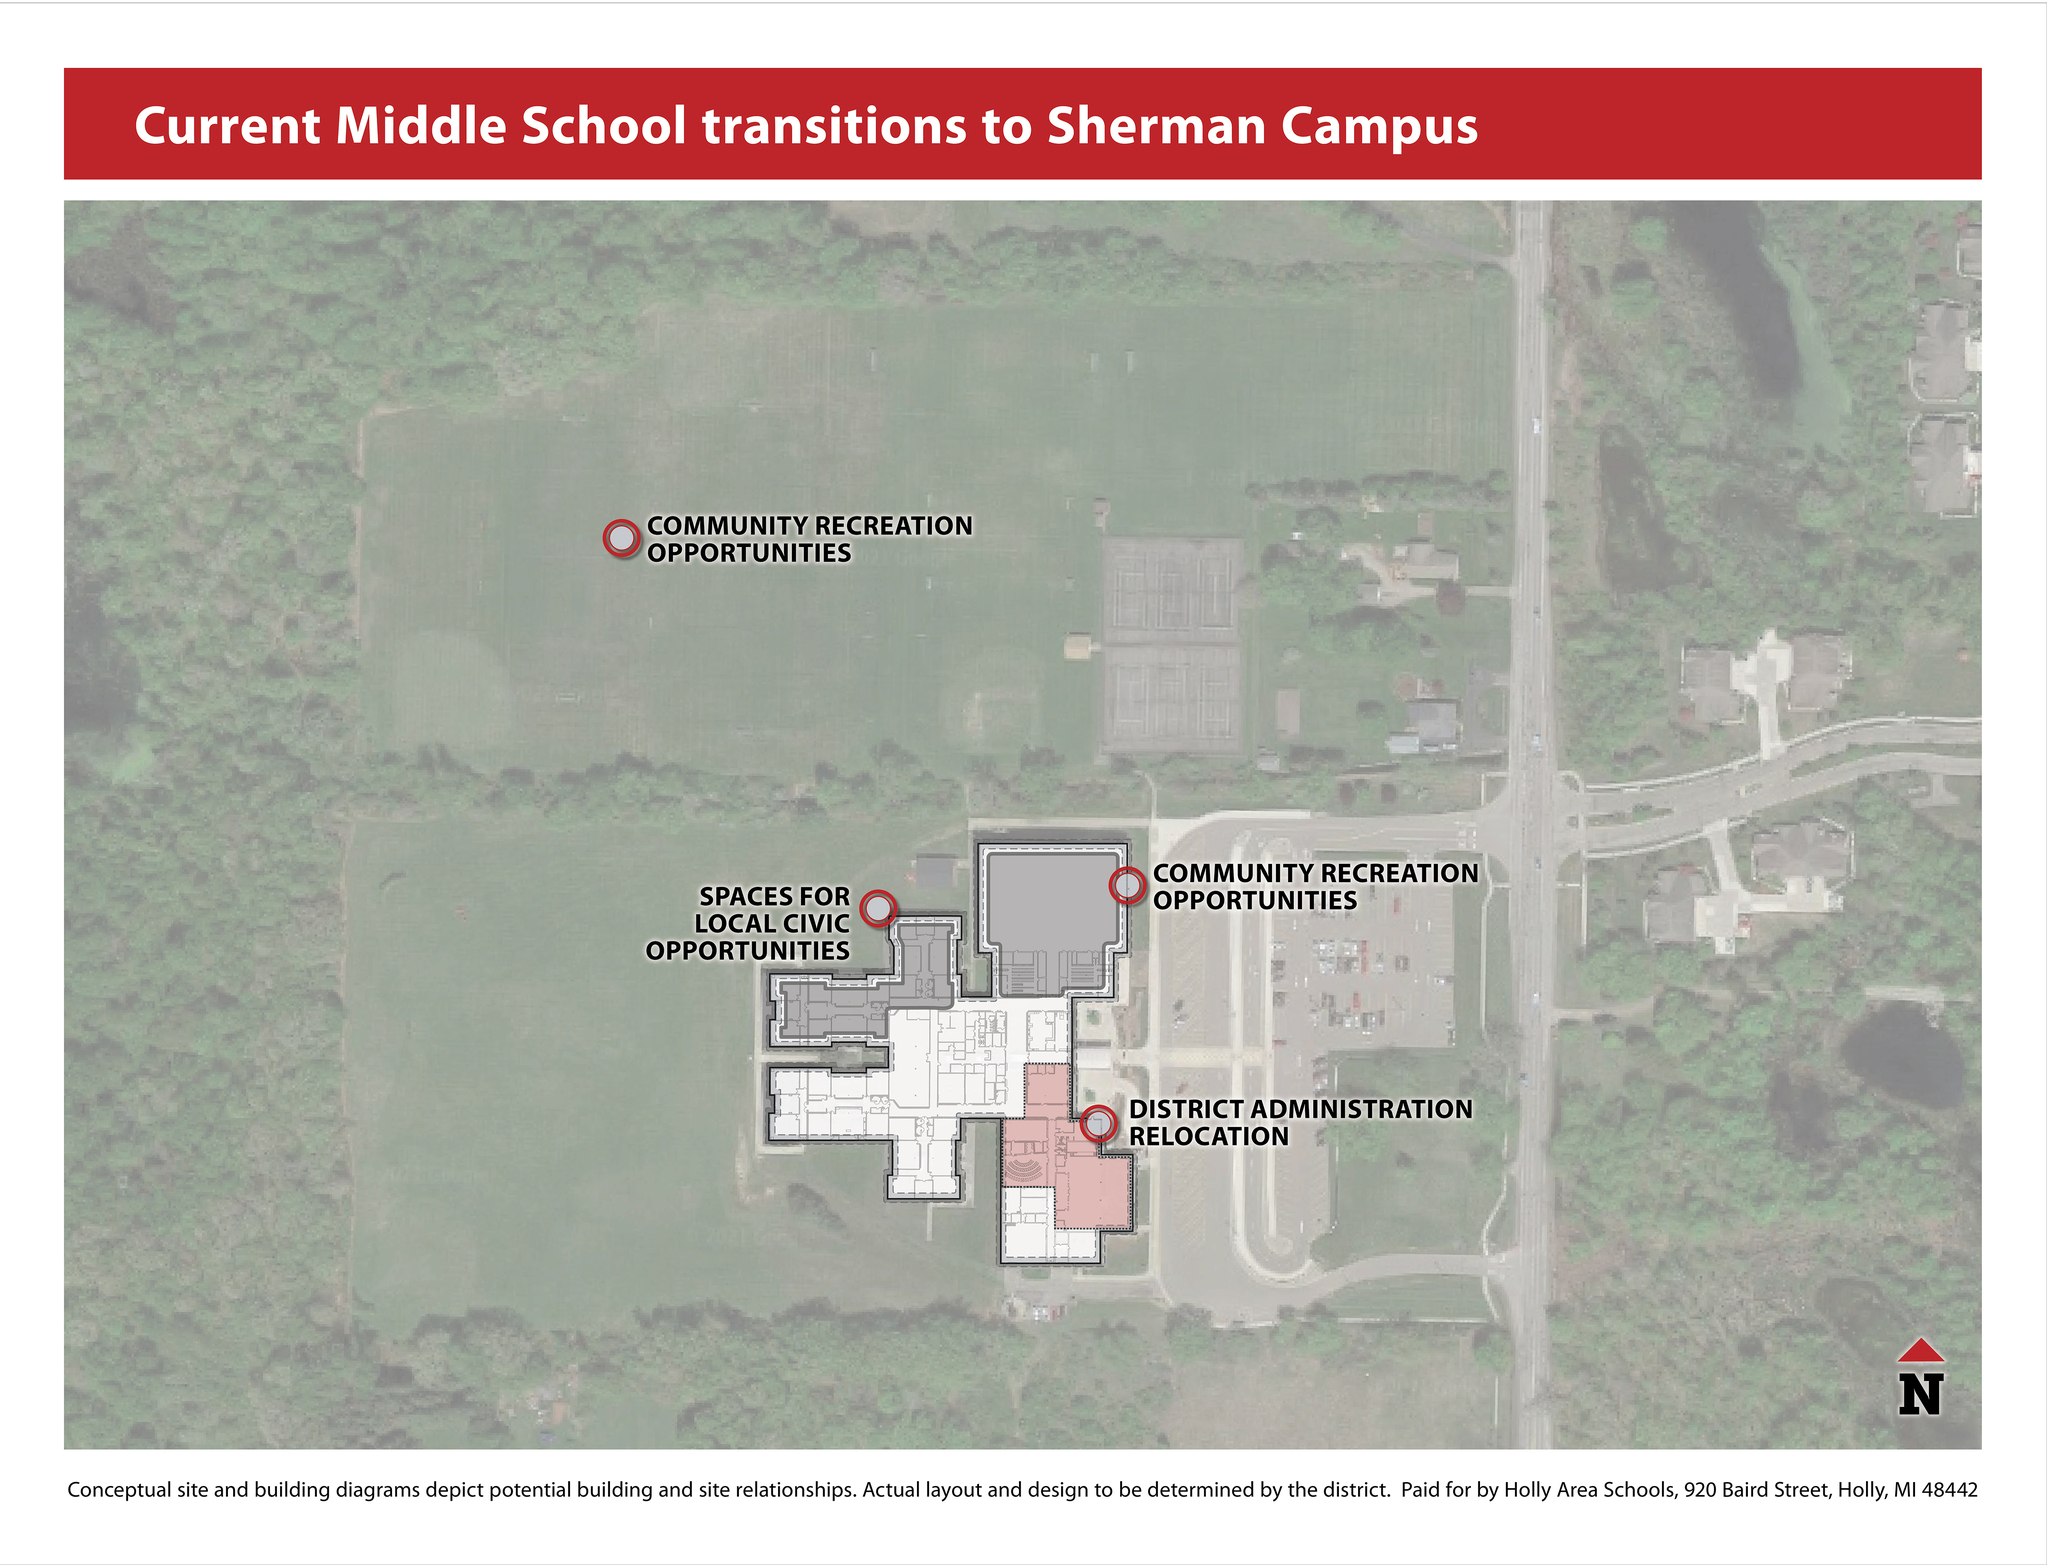 Current Middle School Transitions to Sherman Campus Photo Board